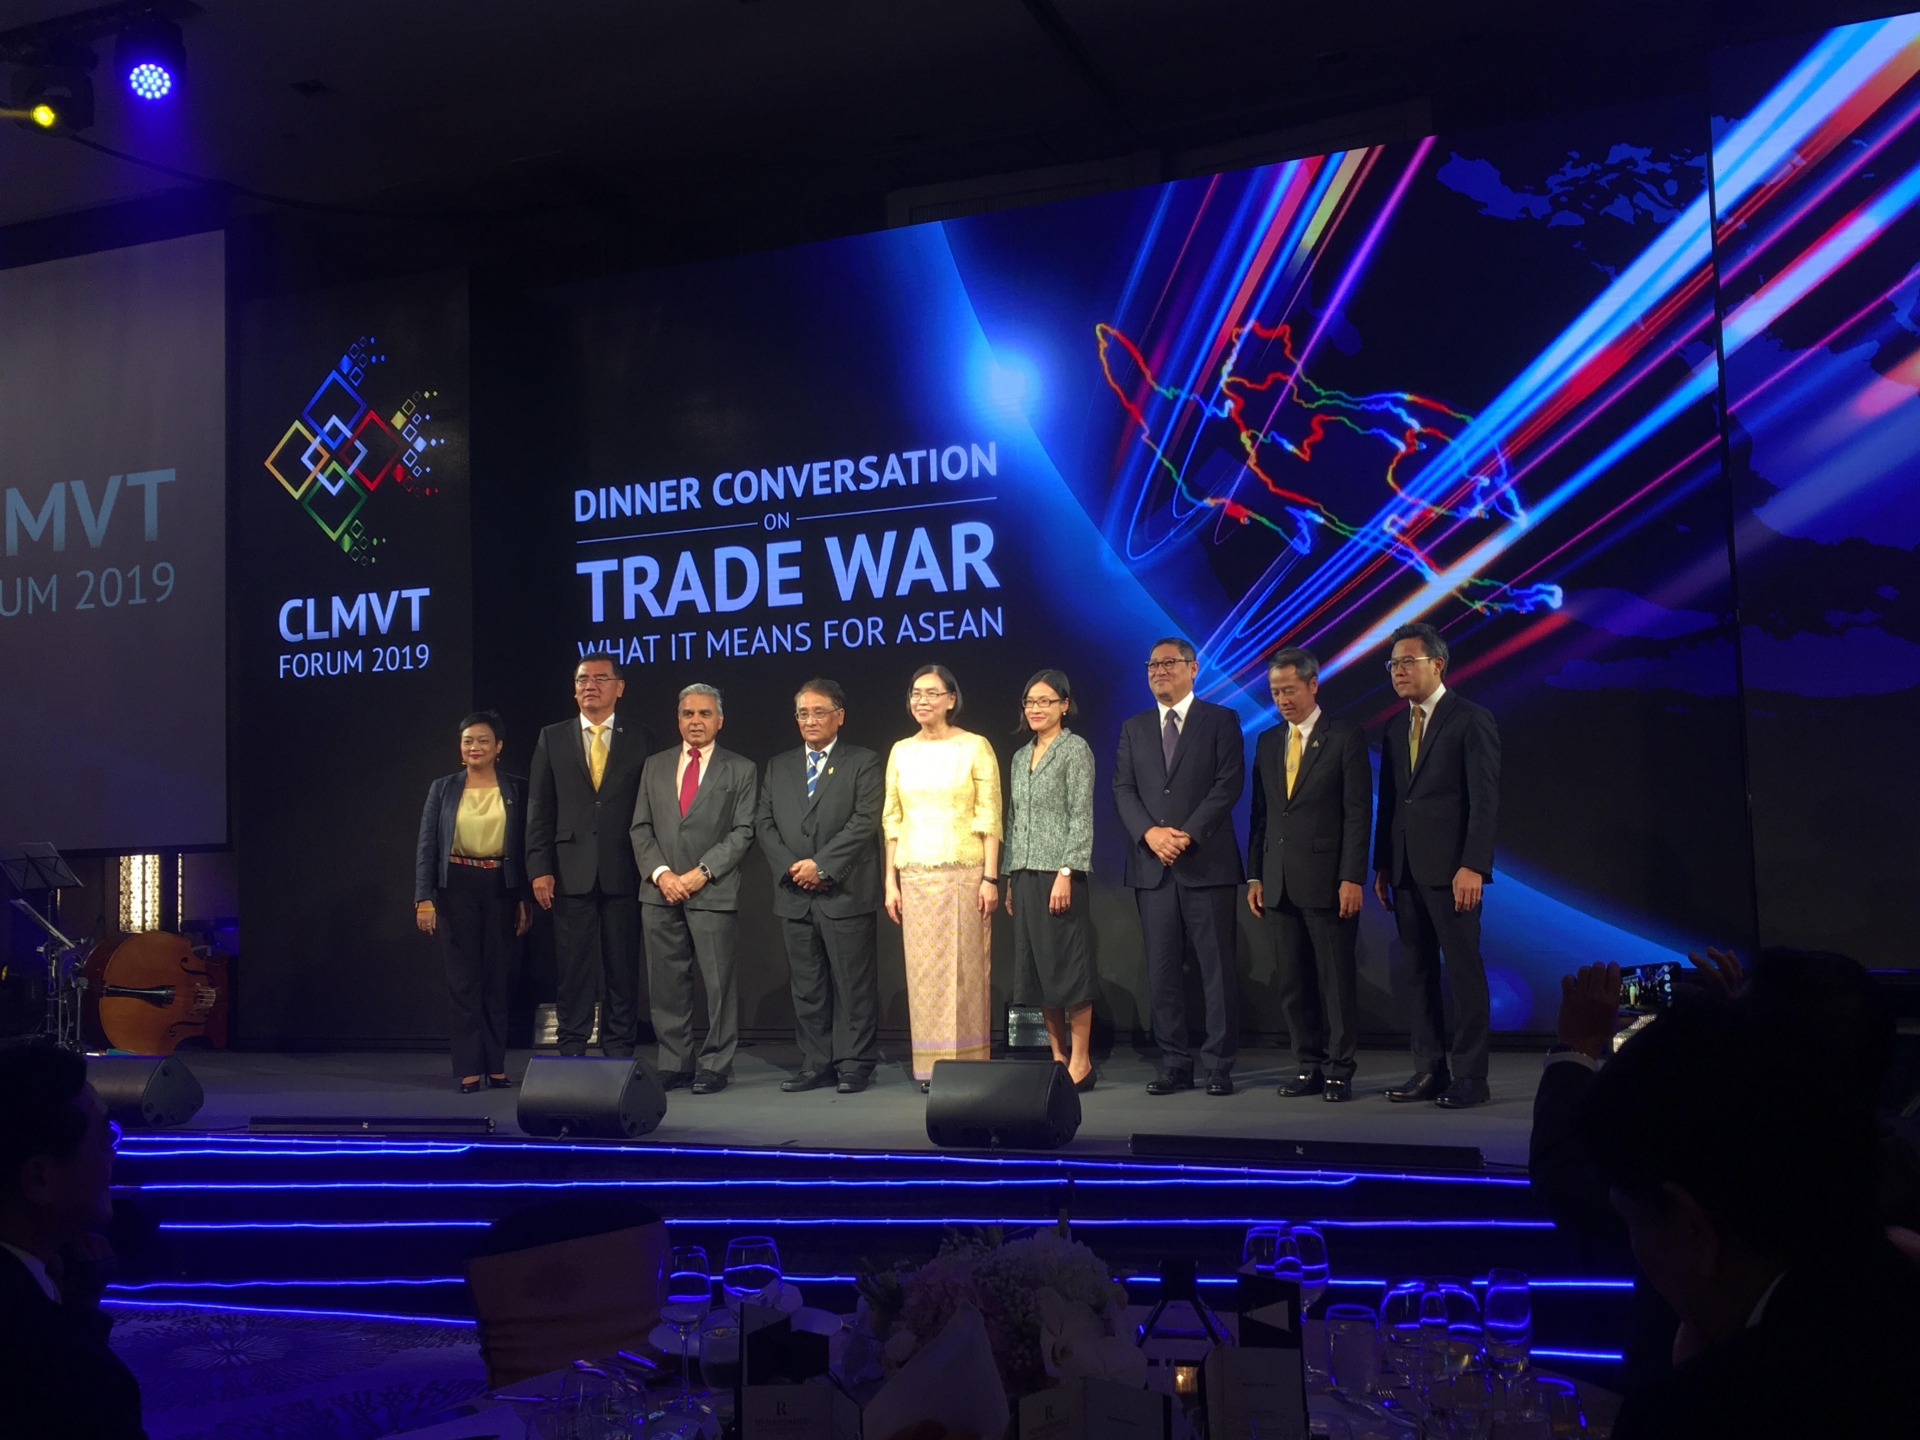 Turning challenges of trade war into opportunities for CLMVT countries